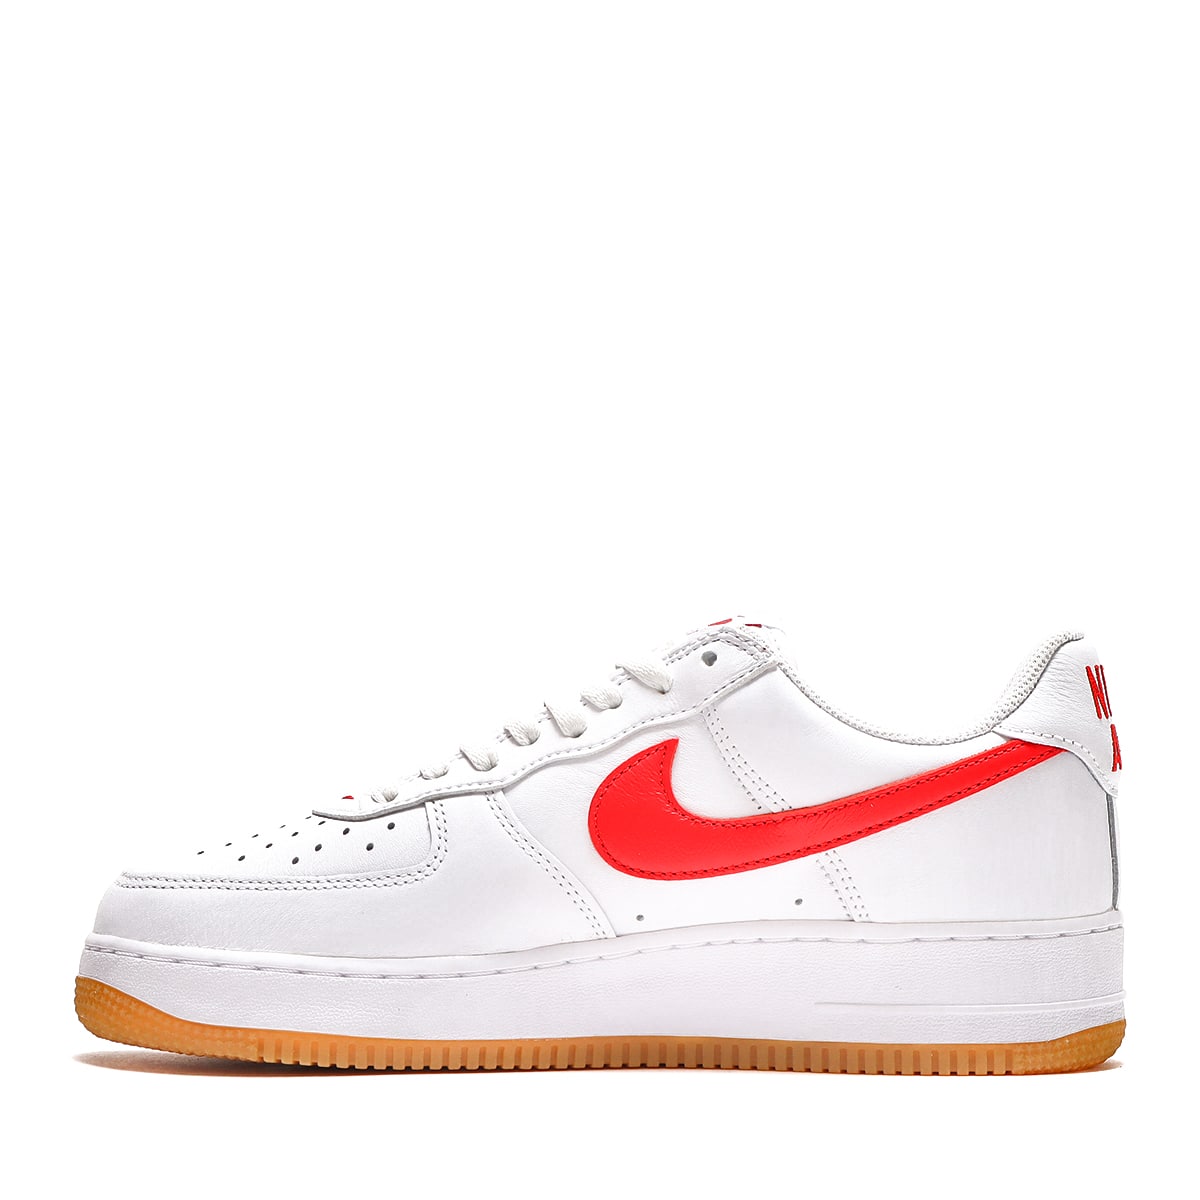 NIKE AIR FORCE LOW RETRO WHITE/UNIVERSITY RED-GUM YELLOW 22SP-I